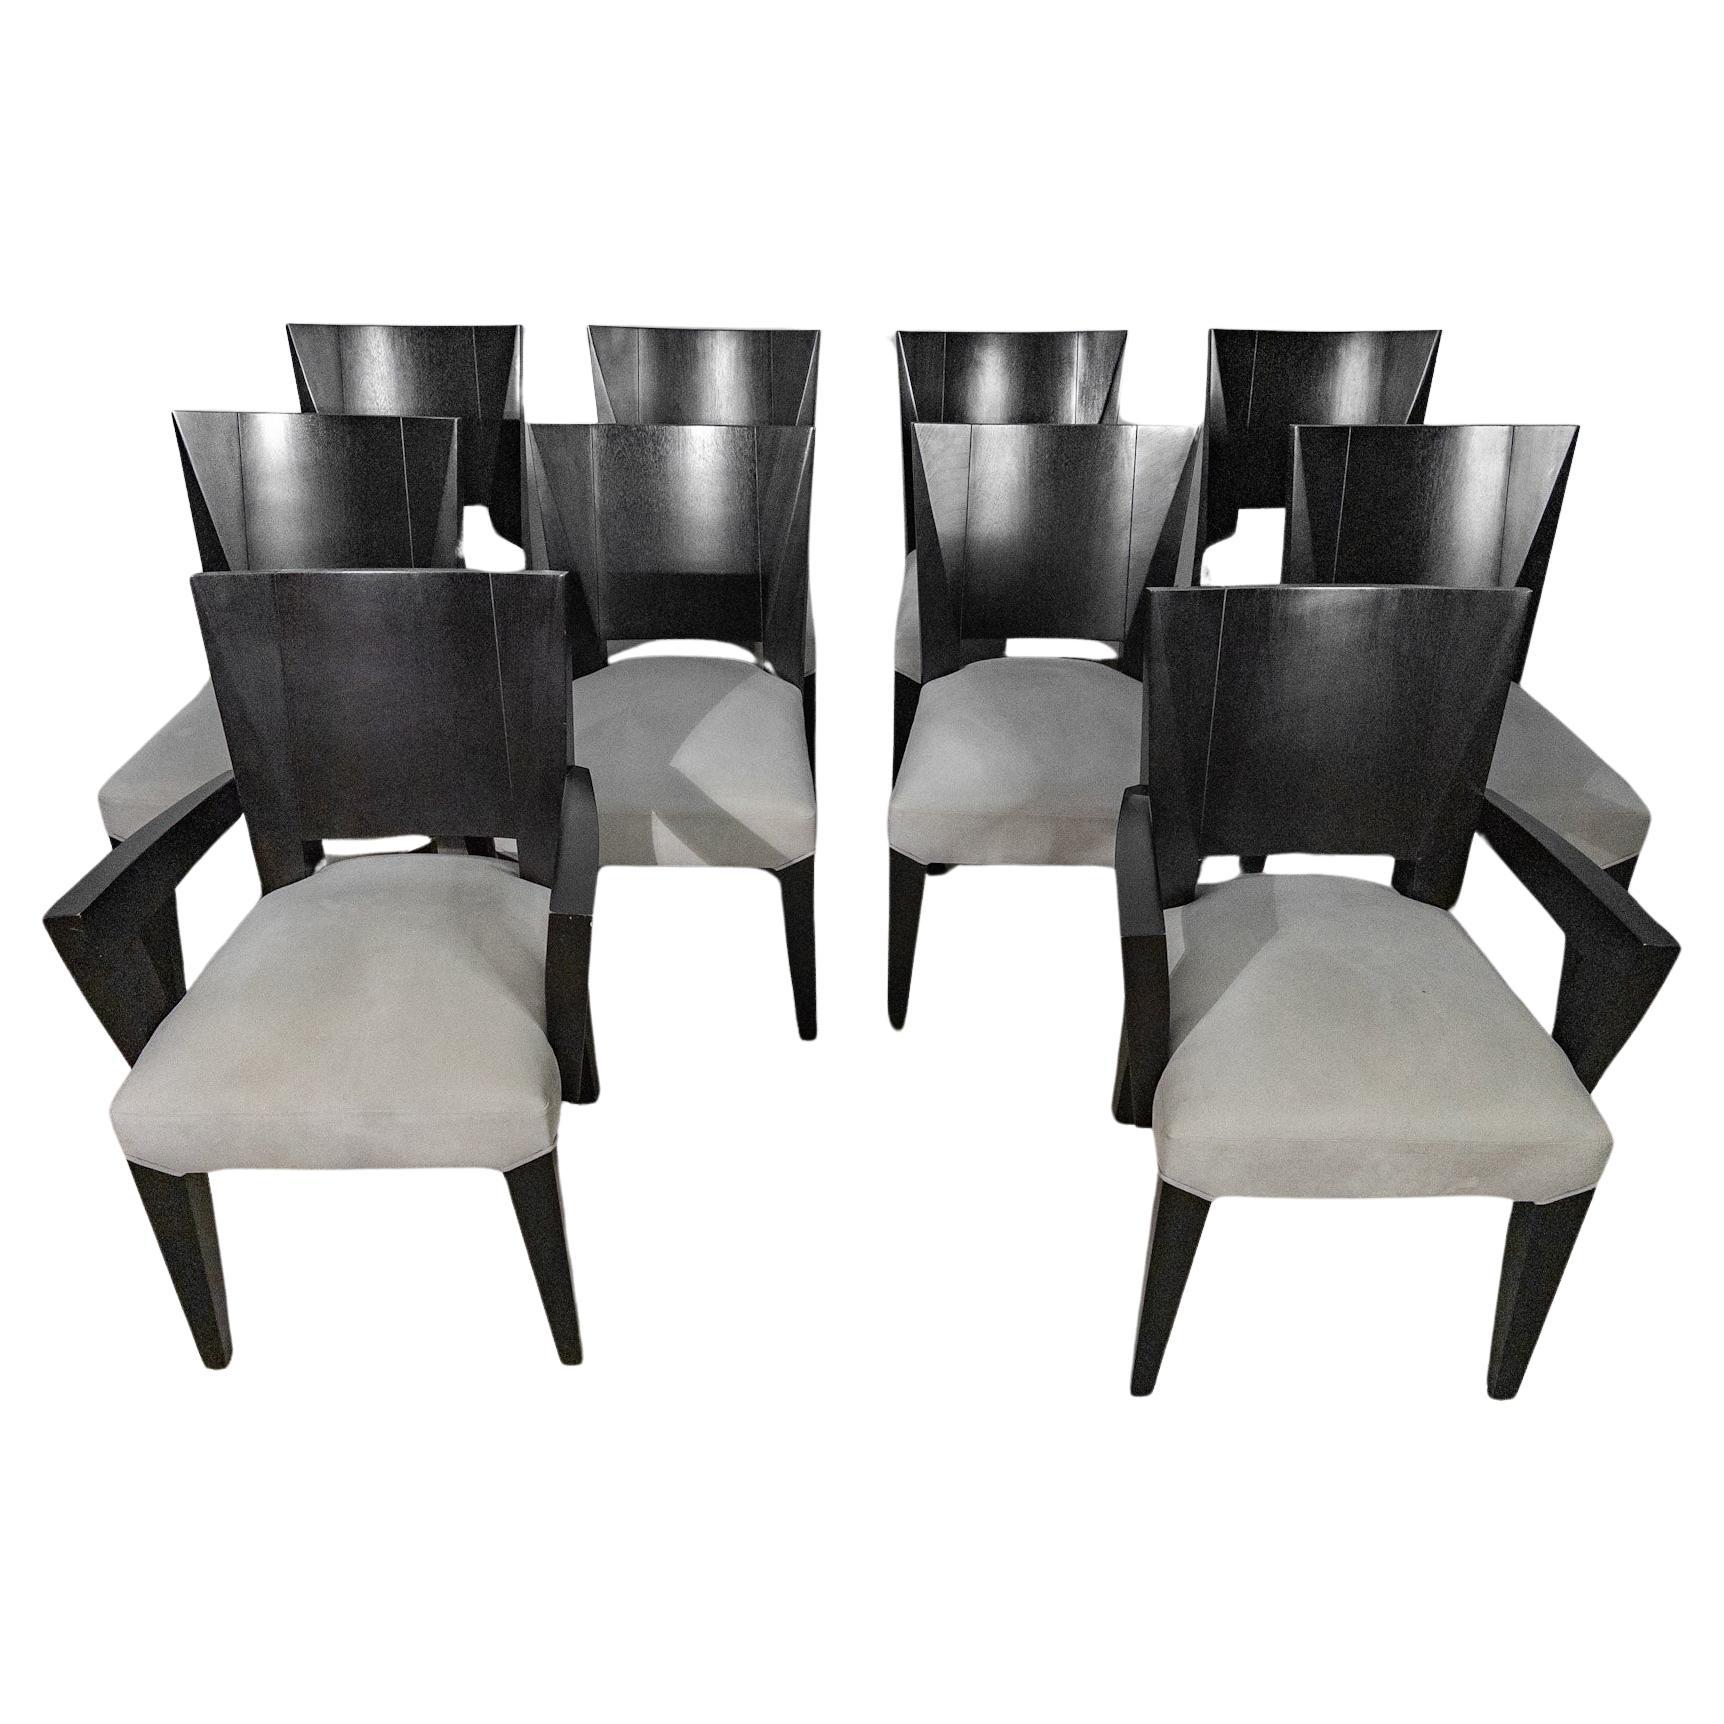 Set of 10 Ocean Dining Chairs by Dakota Jackson (2 Arm Chairs, 8 Side Chairs) For Sale